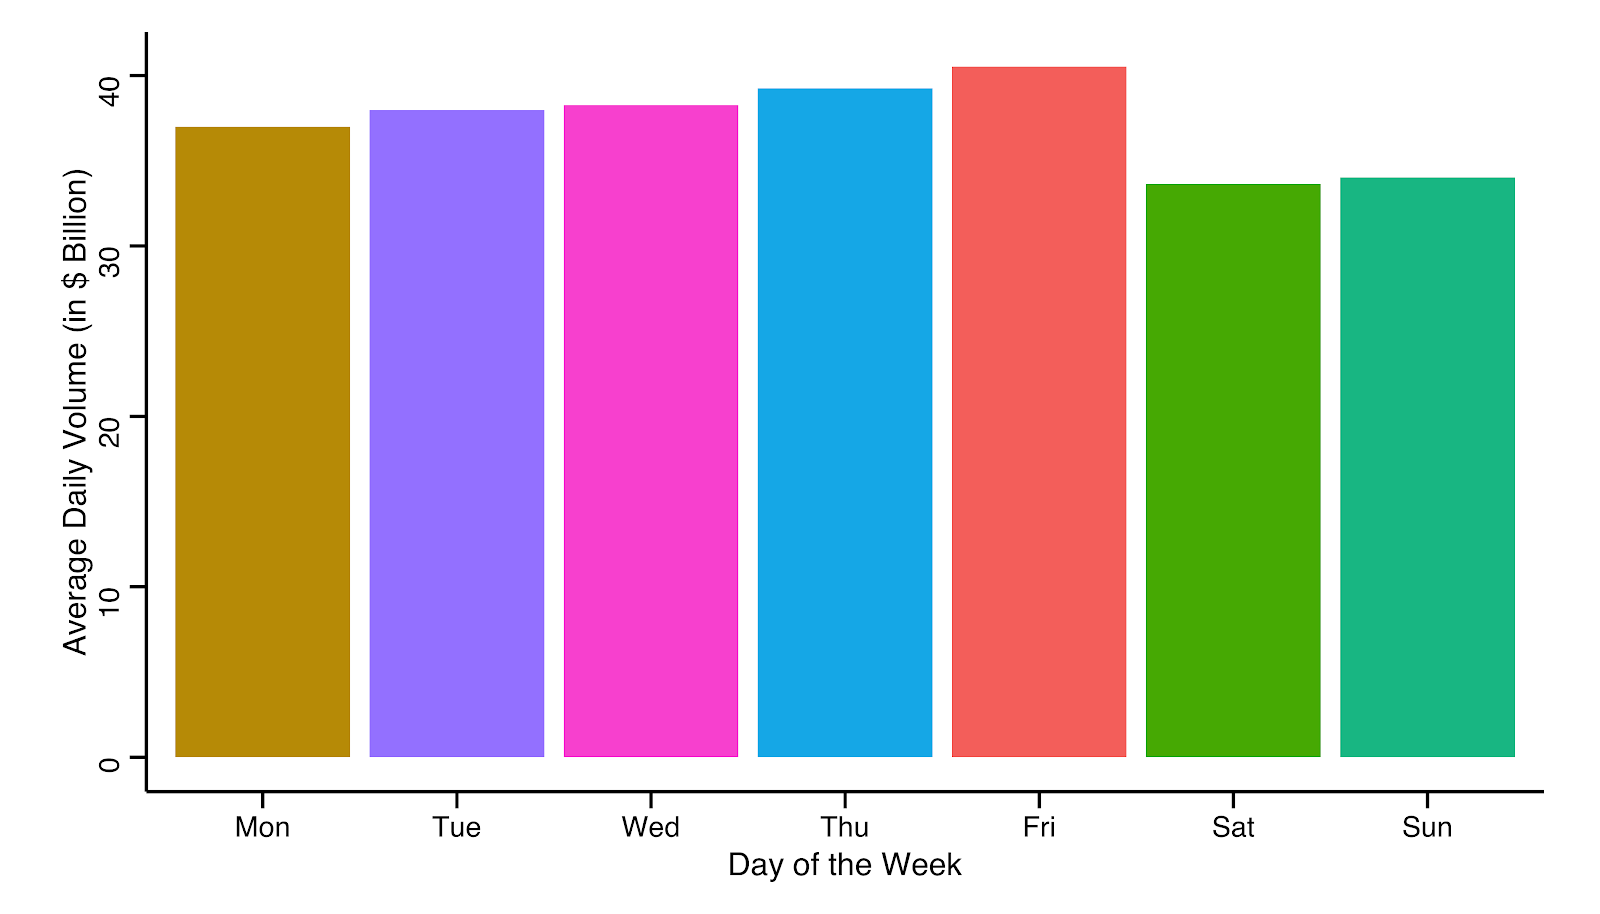 Average daily transaction volume for each day of the week since January.